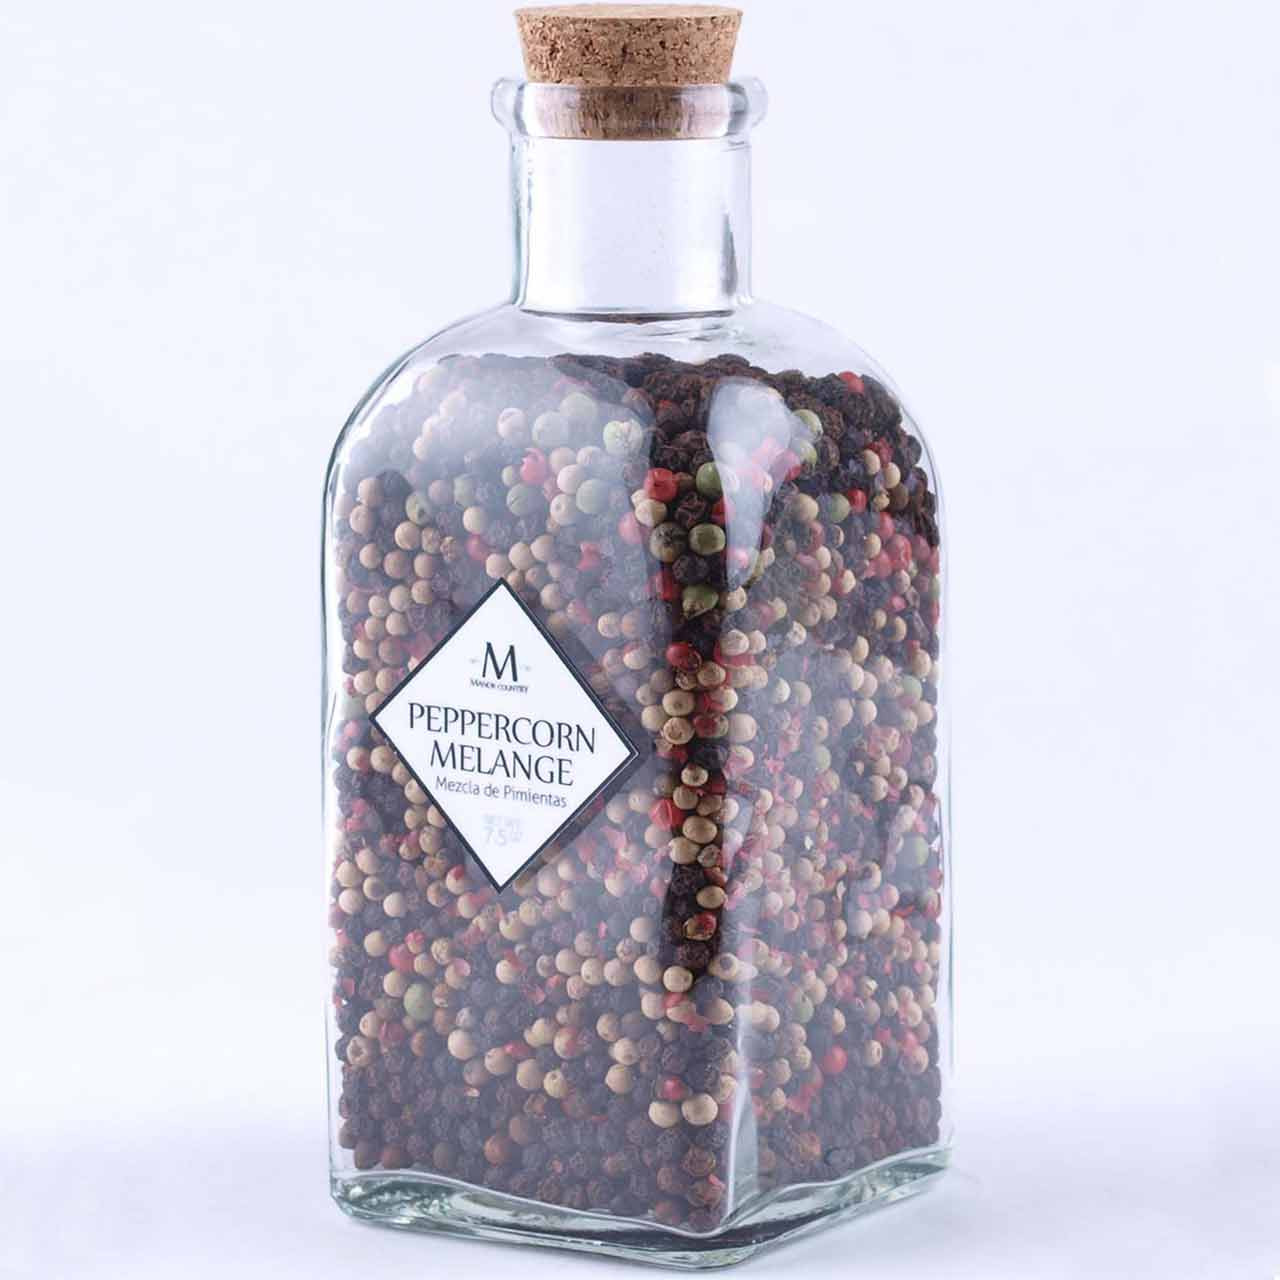 https://cdn11.bigcommerce.com/s-uzavep2g8k/images/stencil/1280x1280/products/132/2901/6053-Wide-Mouth-Roma-Glass-Bottle-Peppercorn__17742.1704138879.jpg?c=1